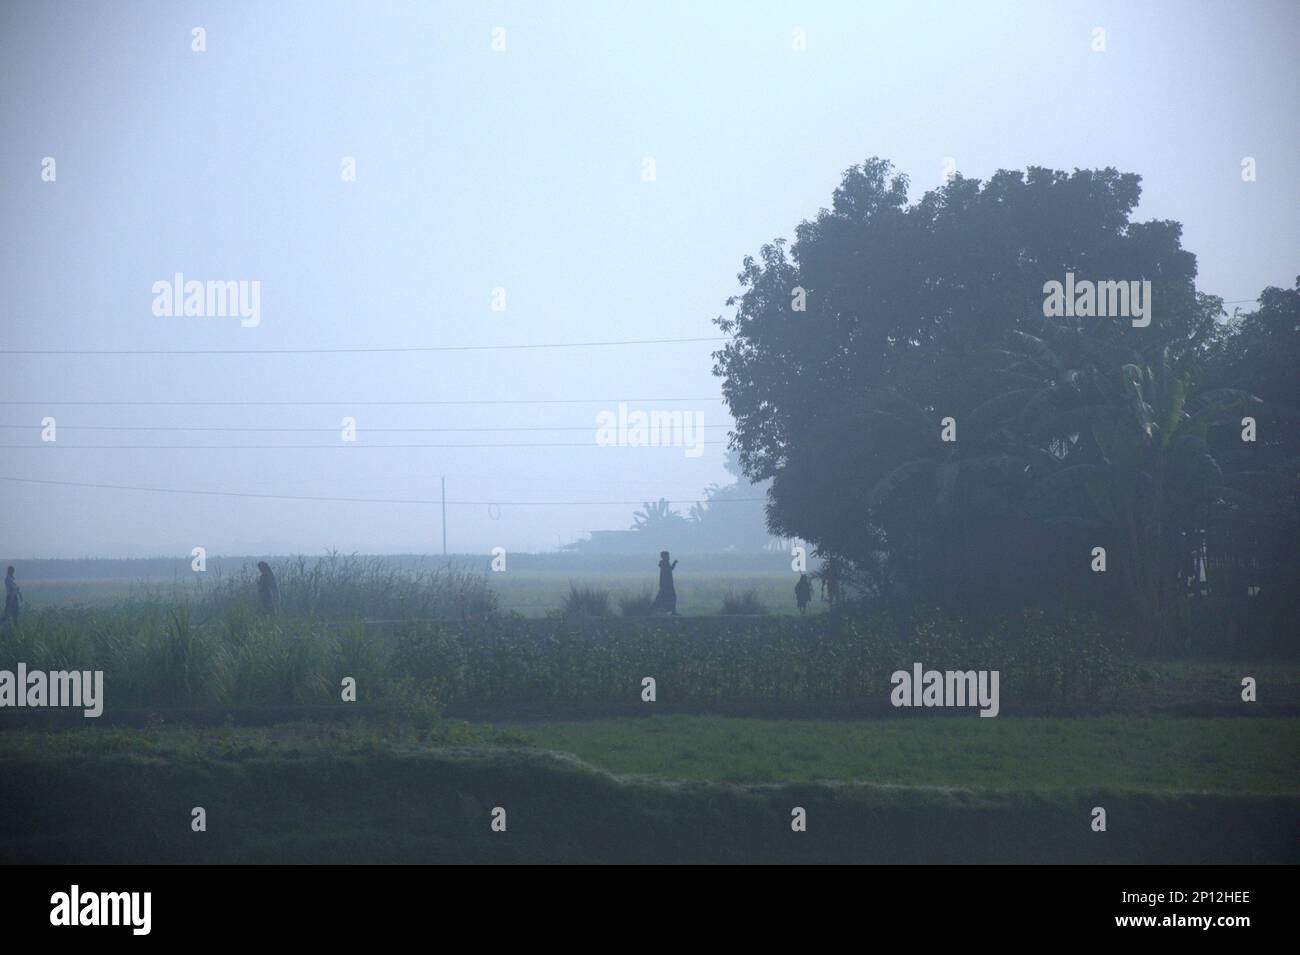 Winter morning picture in a rural side area with mustard field in Bangladesh. Stock Photo